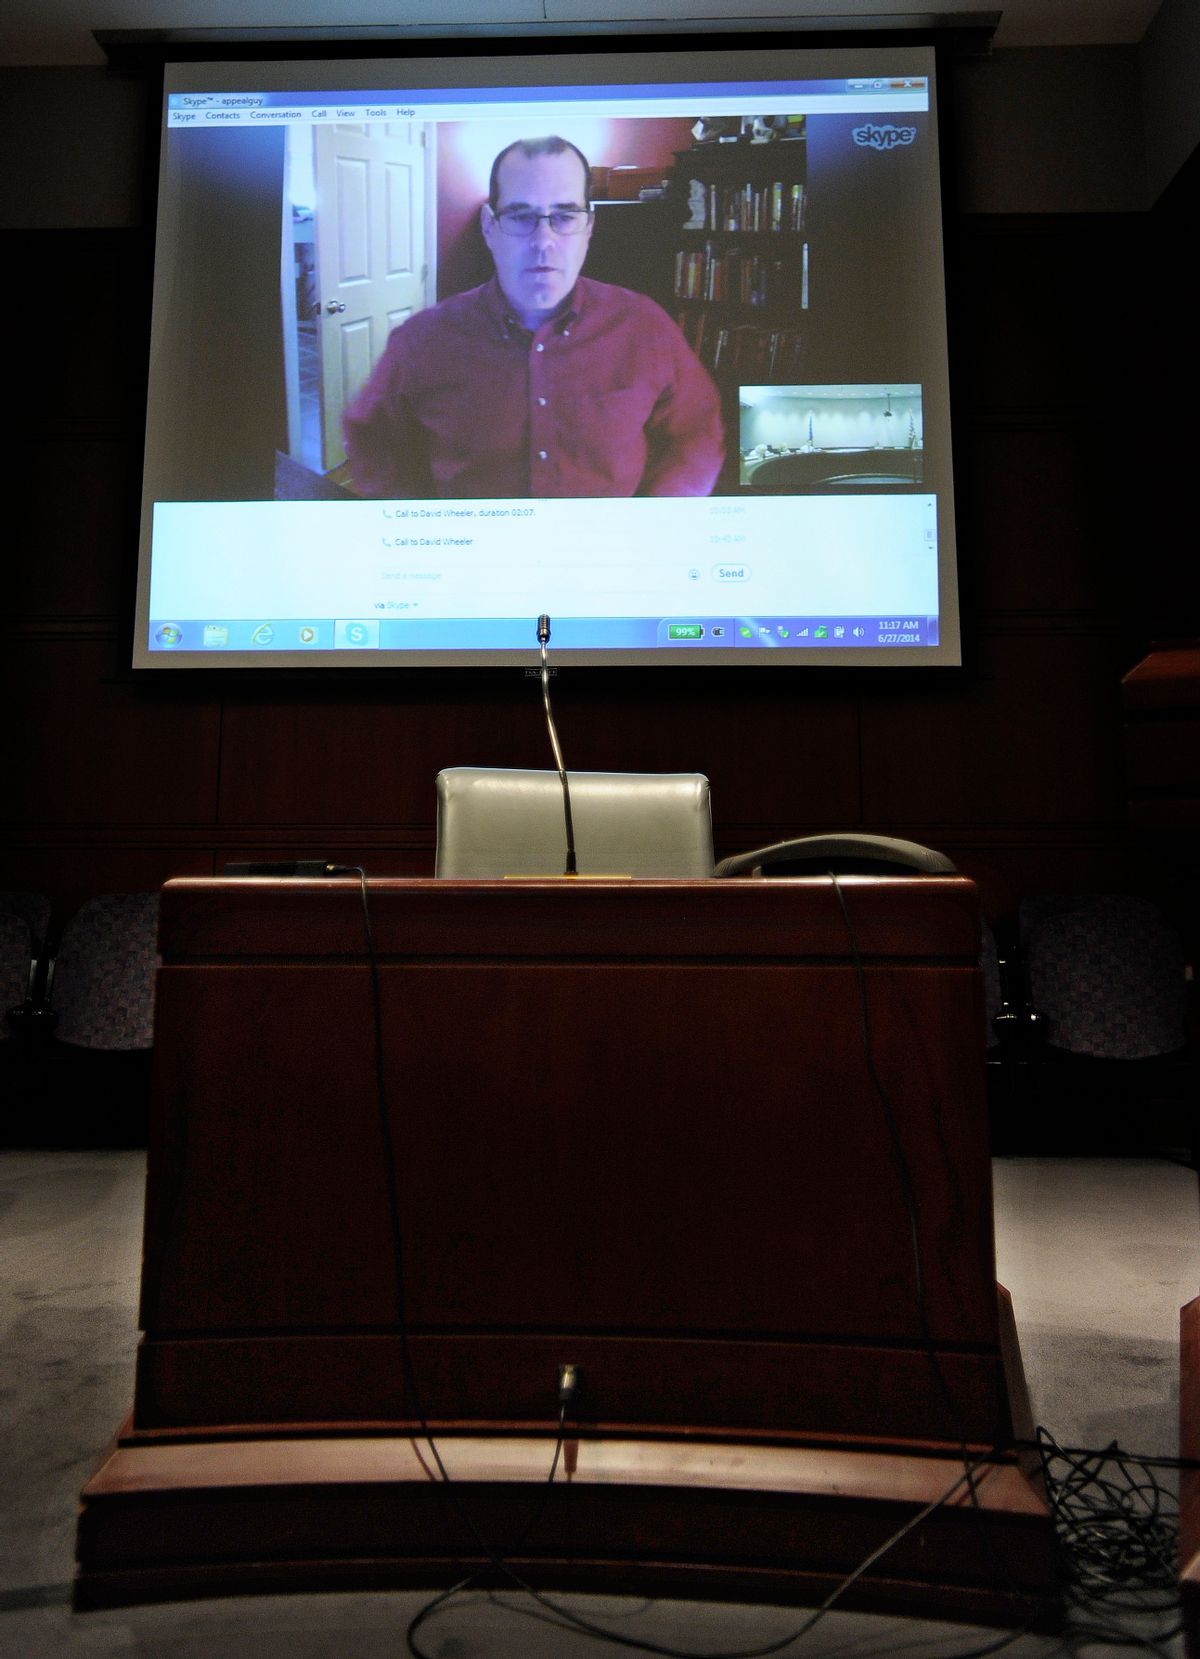 David Wheeler, father of Sandy Hook School shooting victim Benjamin Wheeler, addresses the Sandy Hook Advisory Commission via Skype at the Legislative Office Building, Friday, June 27, 2014, in Hartford, Conn. The Sandy Hook Advisory Commission has been reviewing current policies and making recommendations to Gov. Dannel P. Malloy on school safety, mental health and gun violence prevention. (AP Photo/Jessica Hill)   (AP)